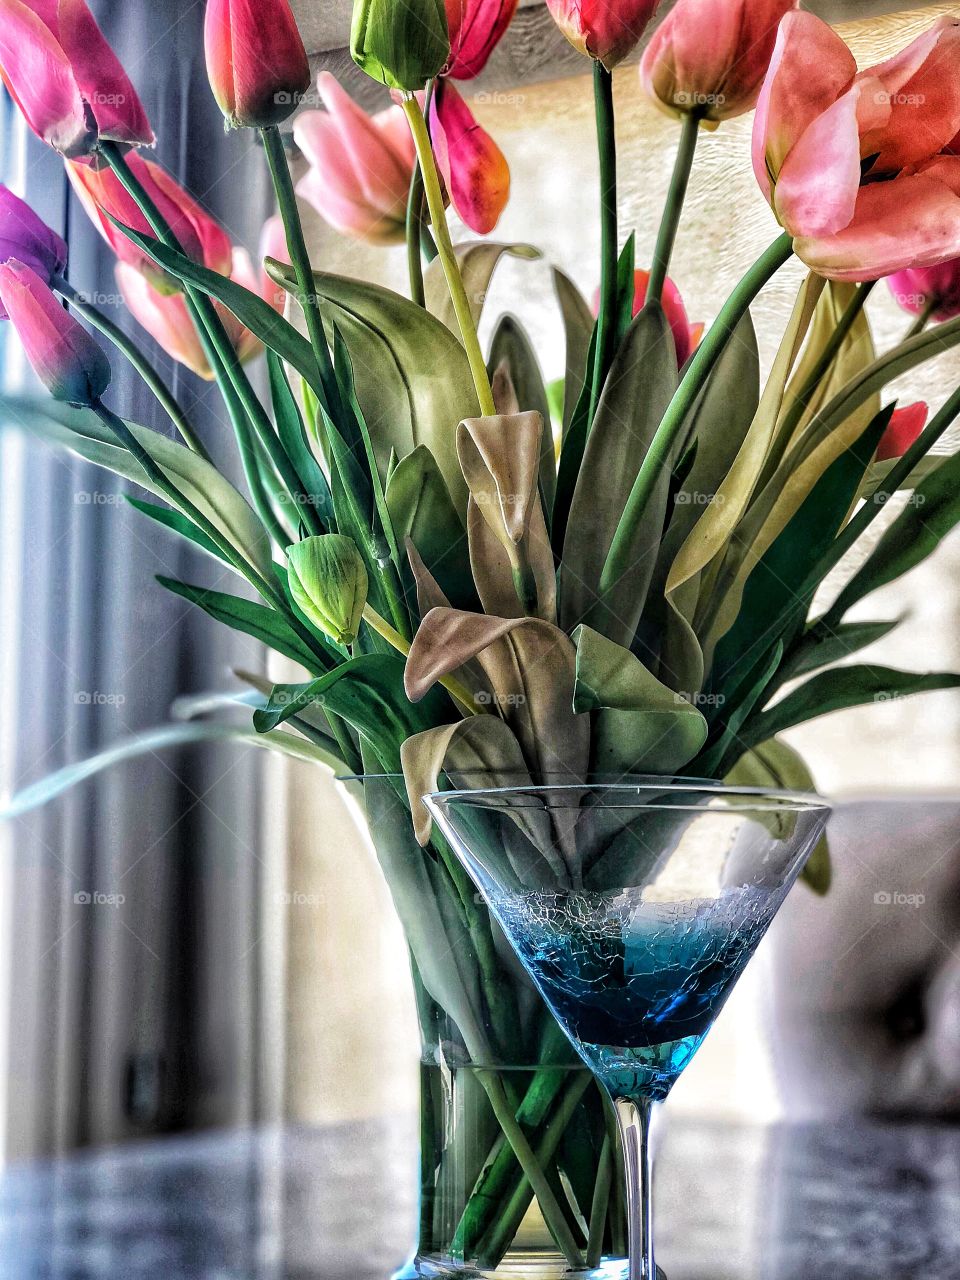 Lifestyle Photography Tulips and Martinis!